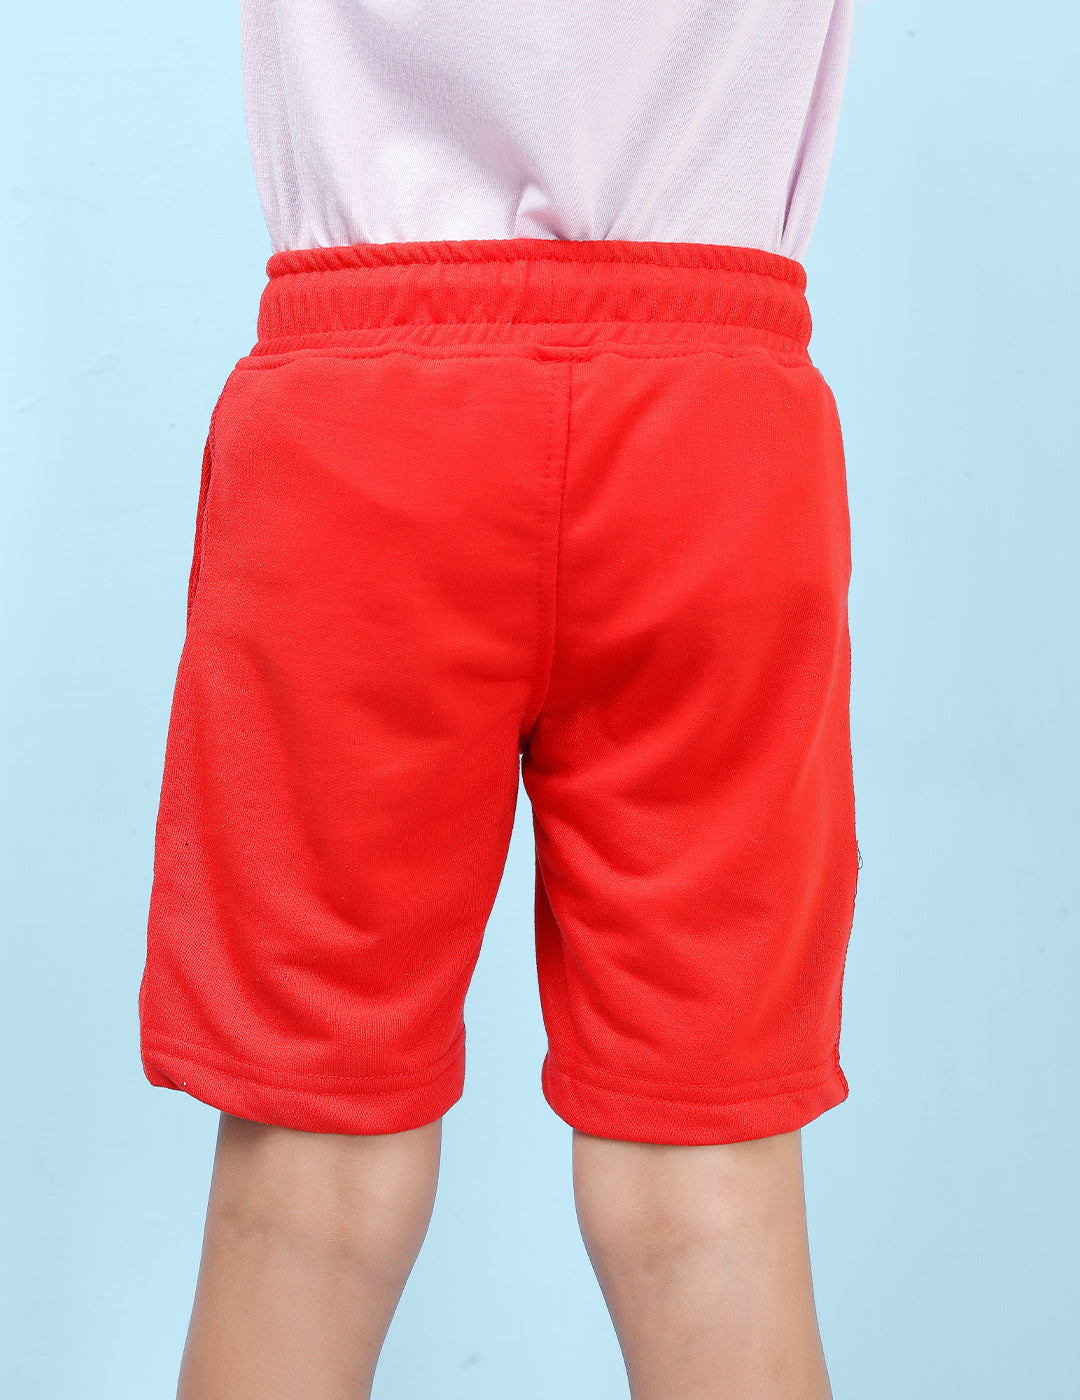 Nusyl Chall enges Printed Red Boys Shorts